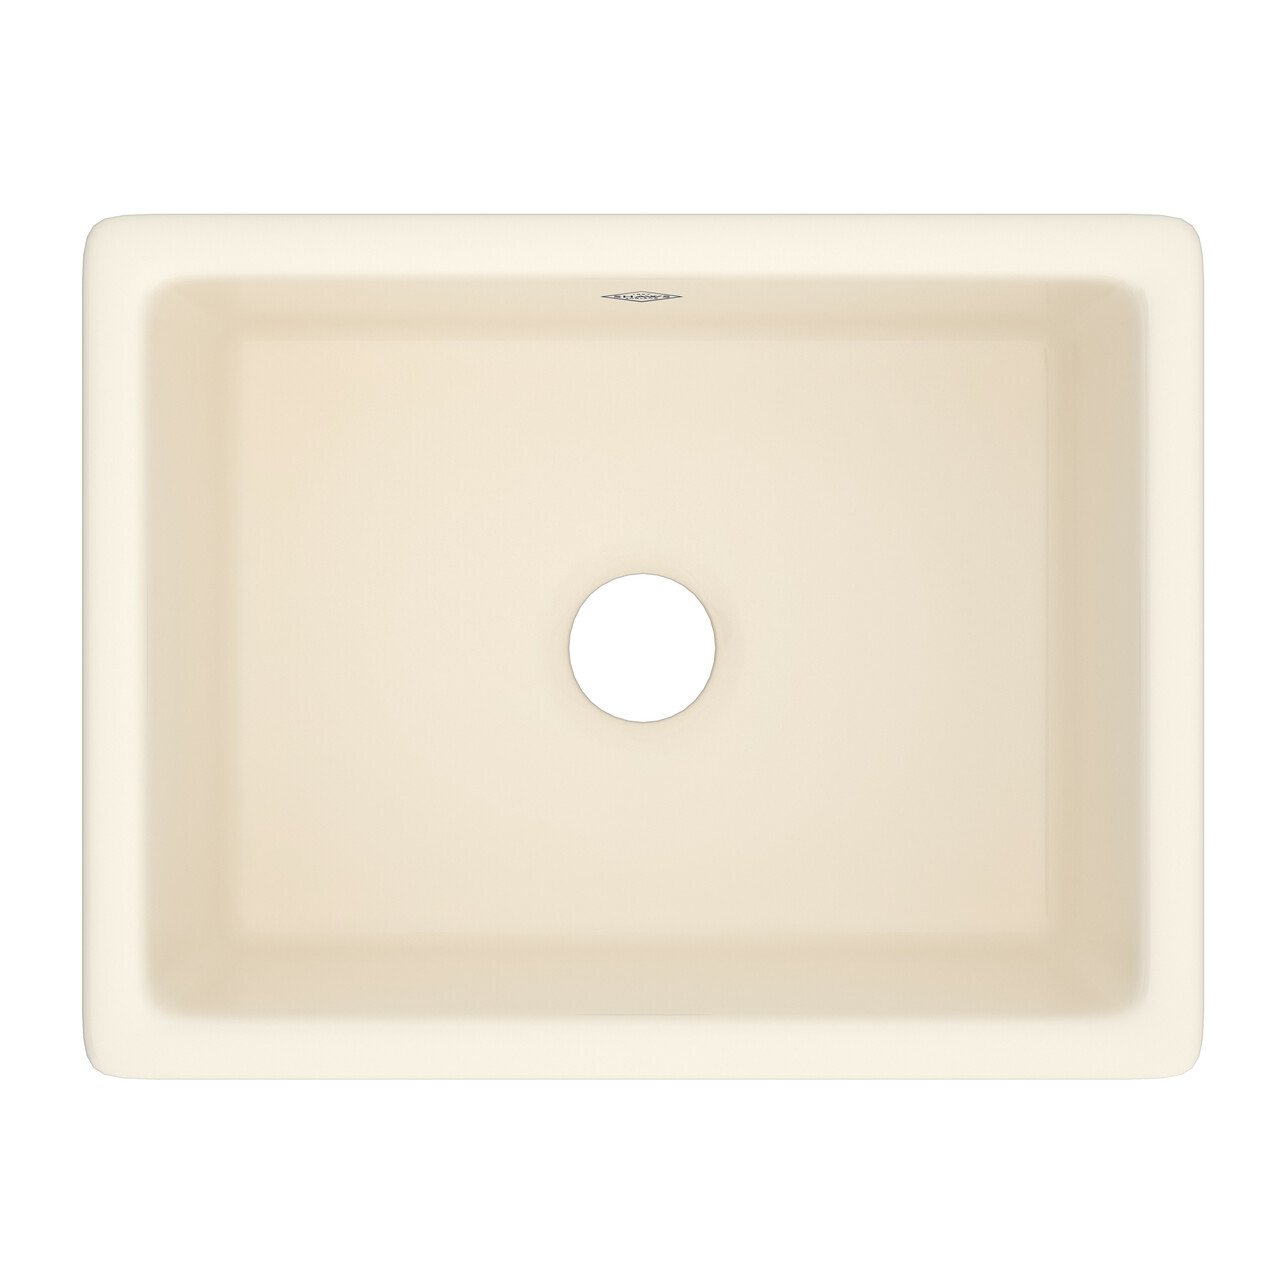 Shaws Classic Shaker Single Bowl Inset or Undermount Fireclay Secondary Kitchen or Laundry Sink - BNGBath